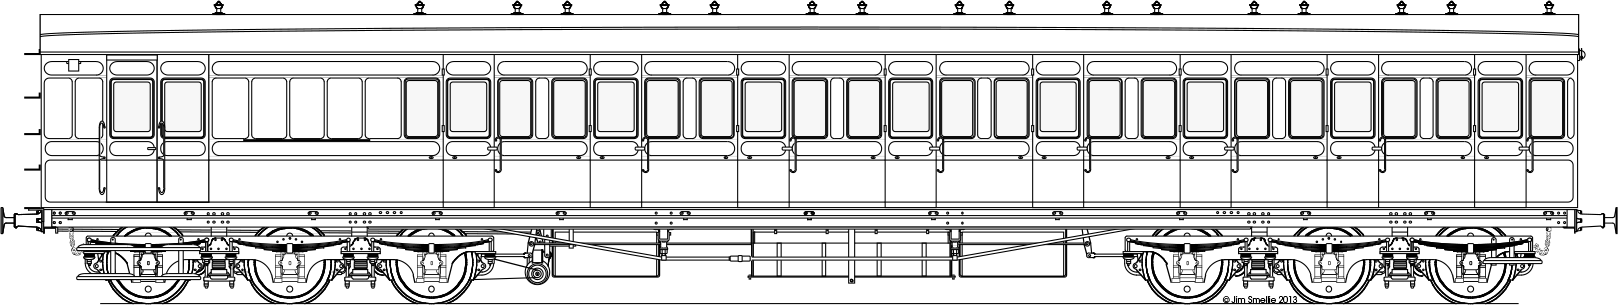 Scale drawing of D101